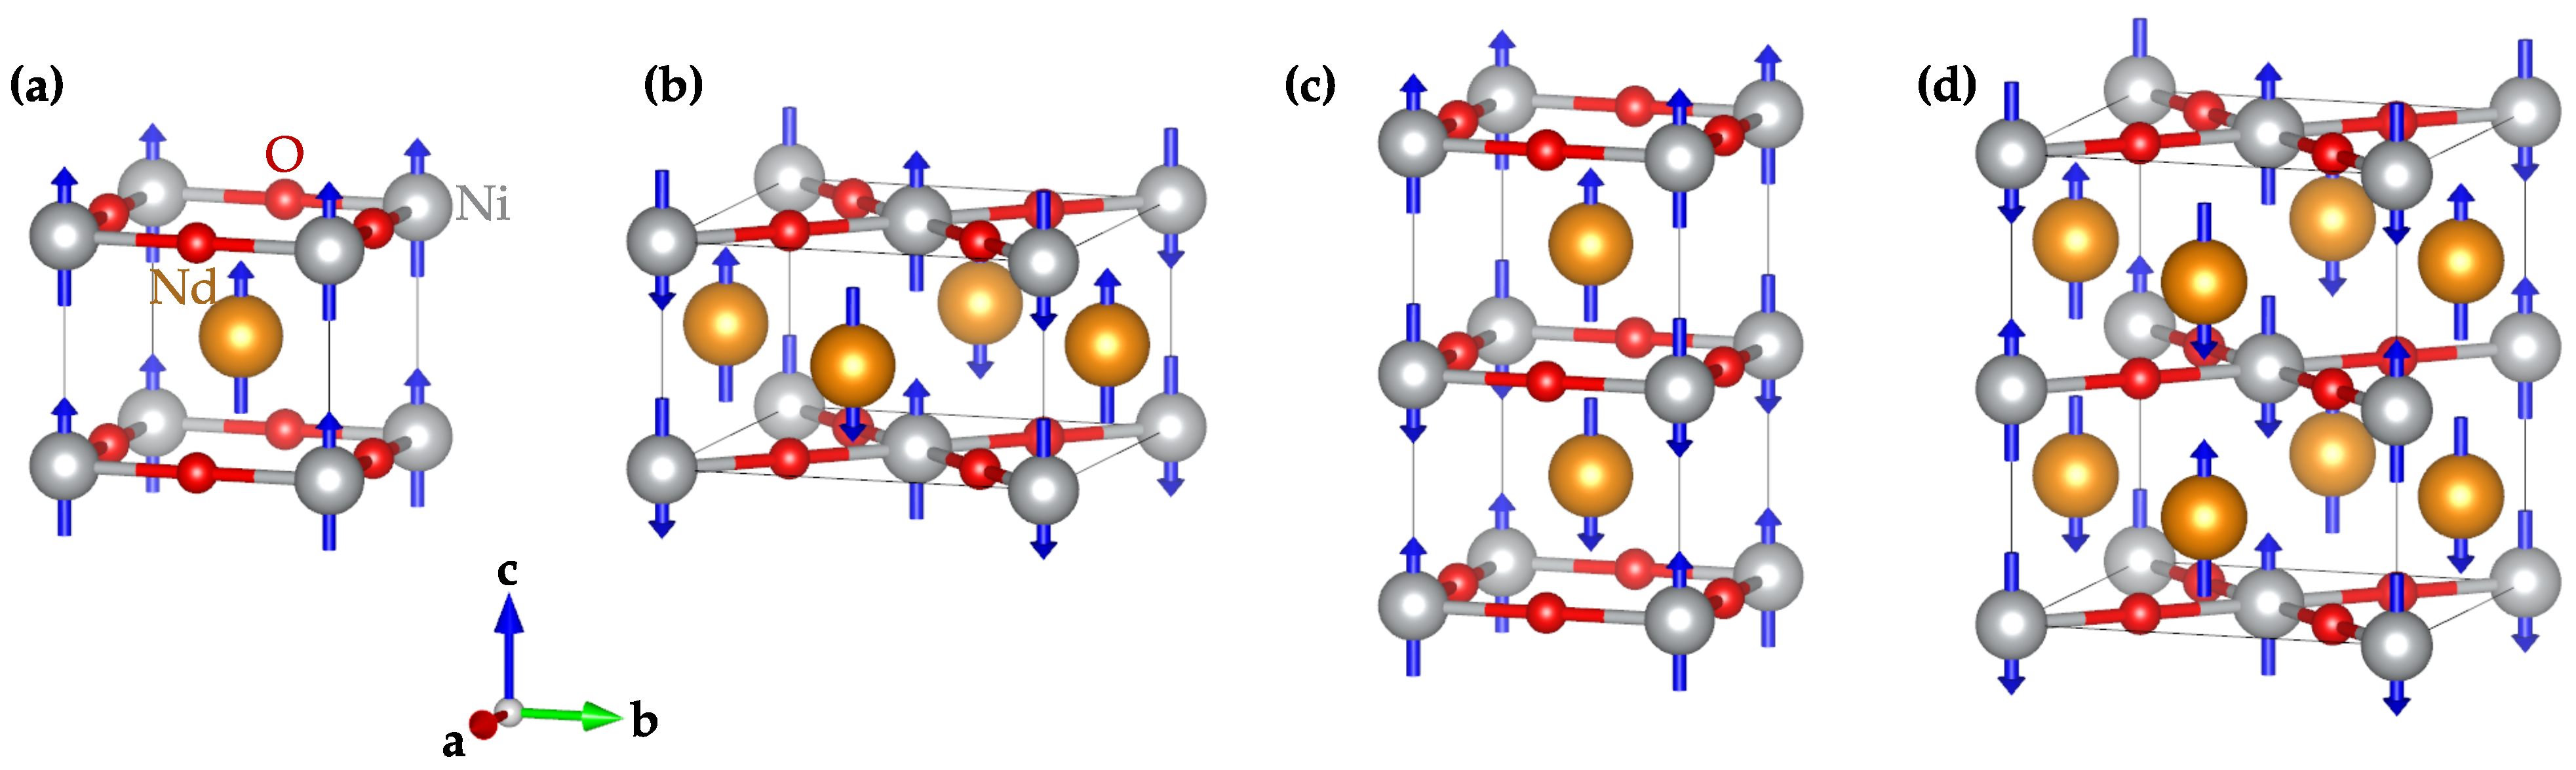 Condensed Matter | Free Full-Text | Influence of f Electrons on the ...